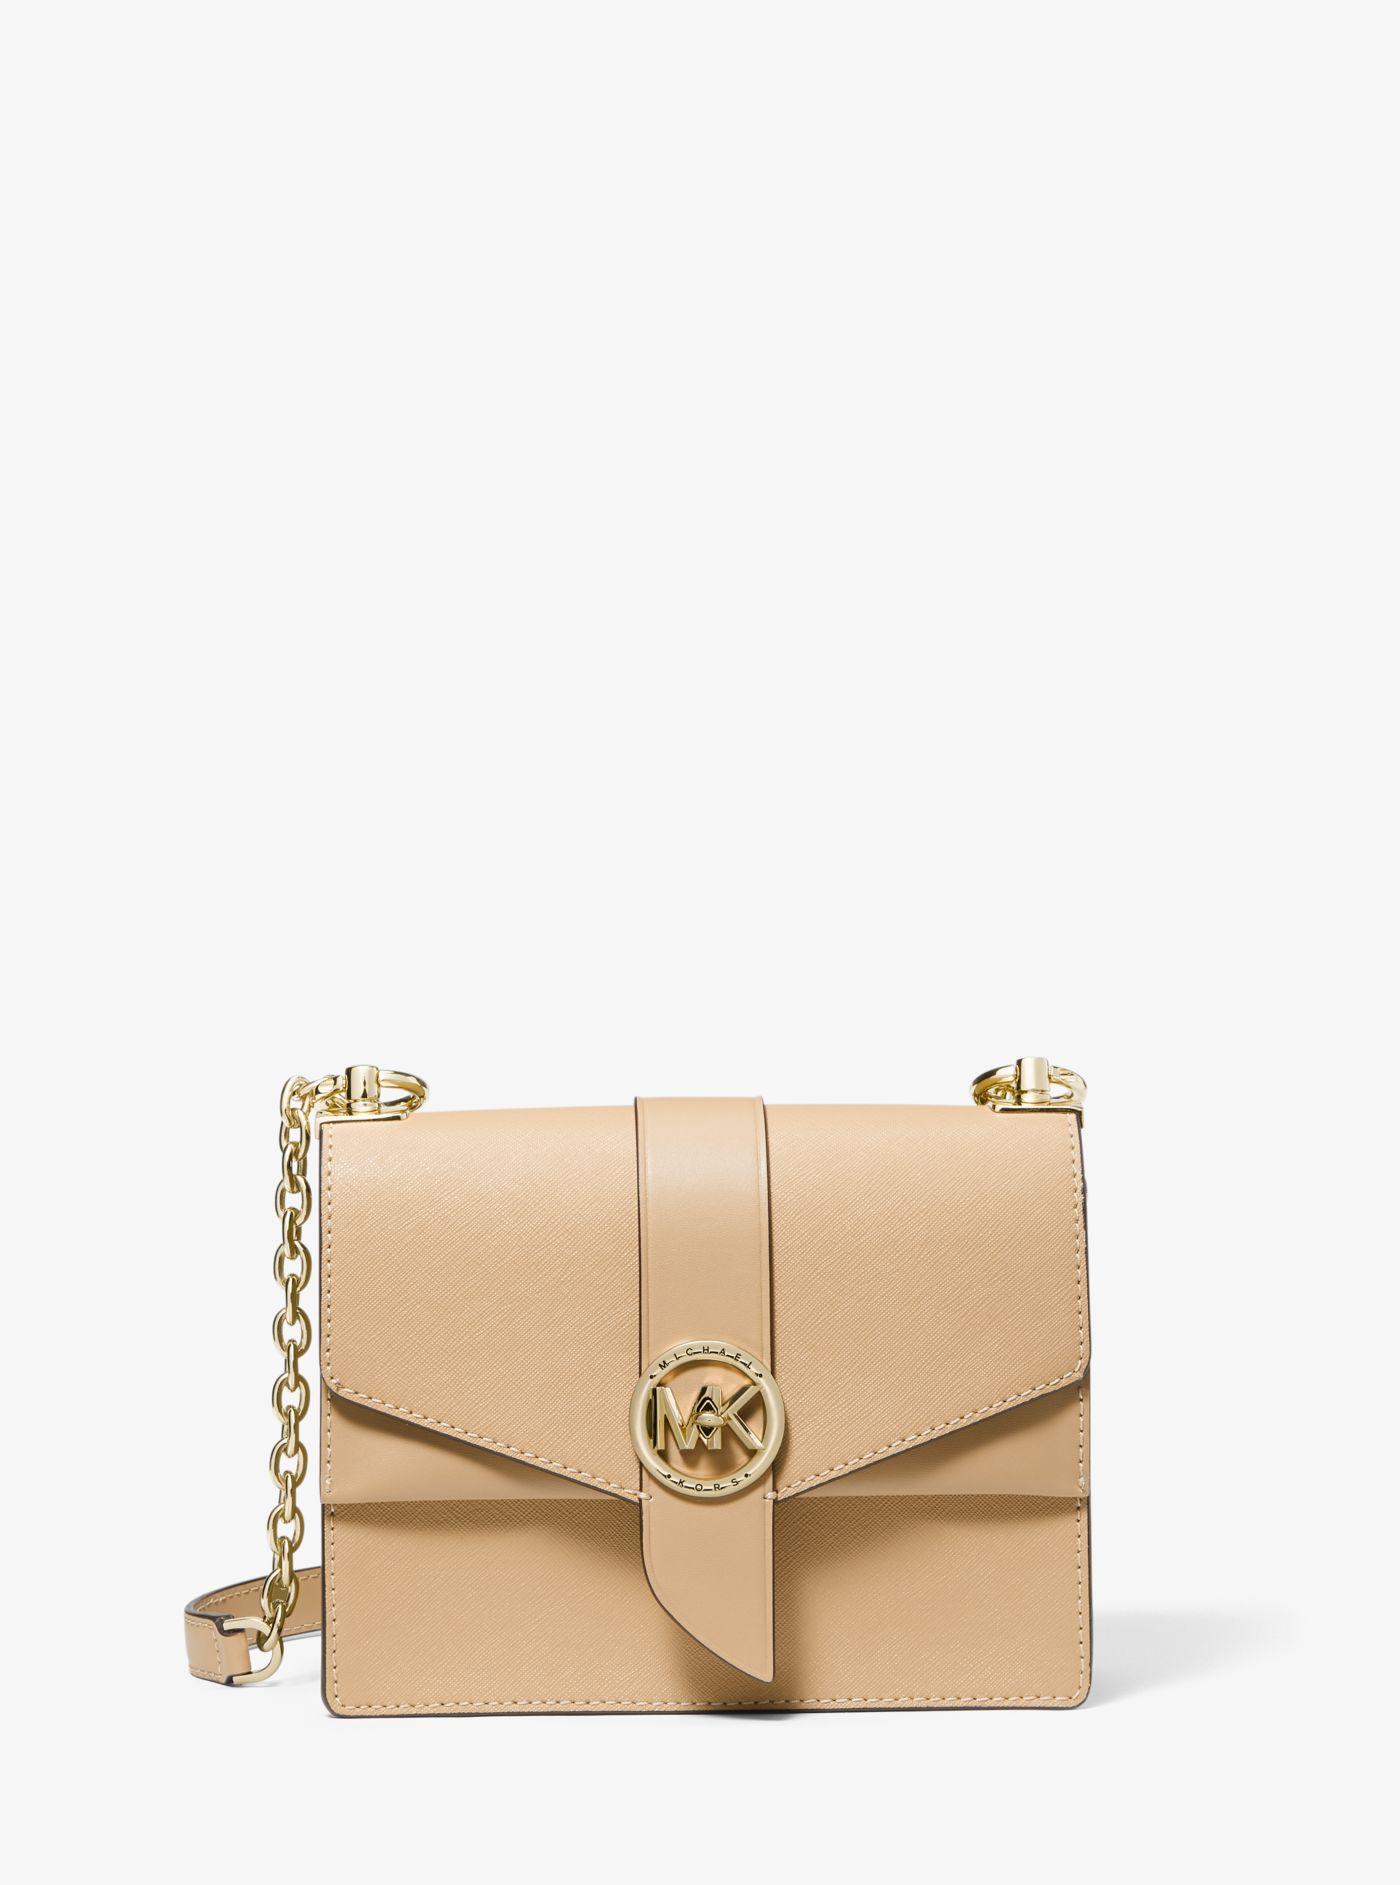 Michael Kors Greenwich Small Saffiano Leather Crossbody Bag in Natural |  Lyst